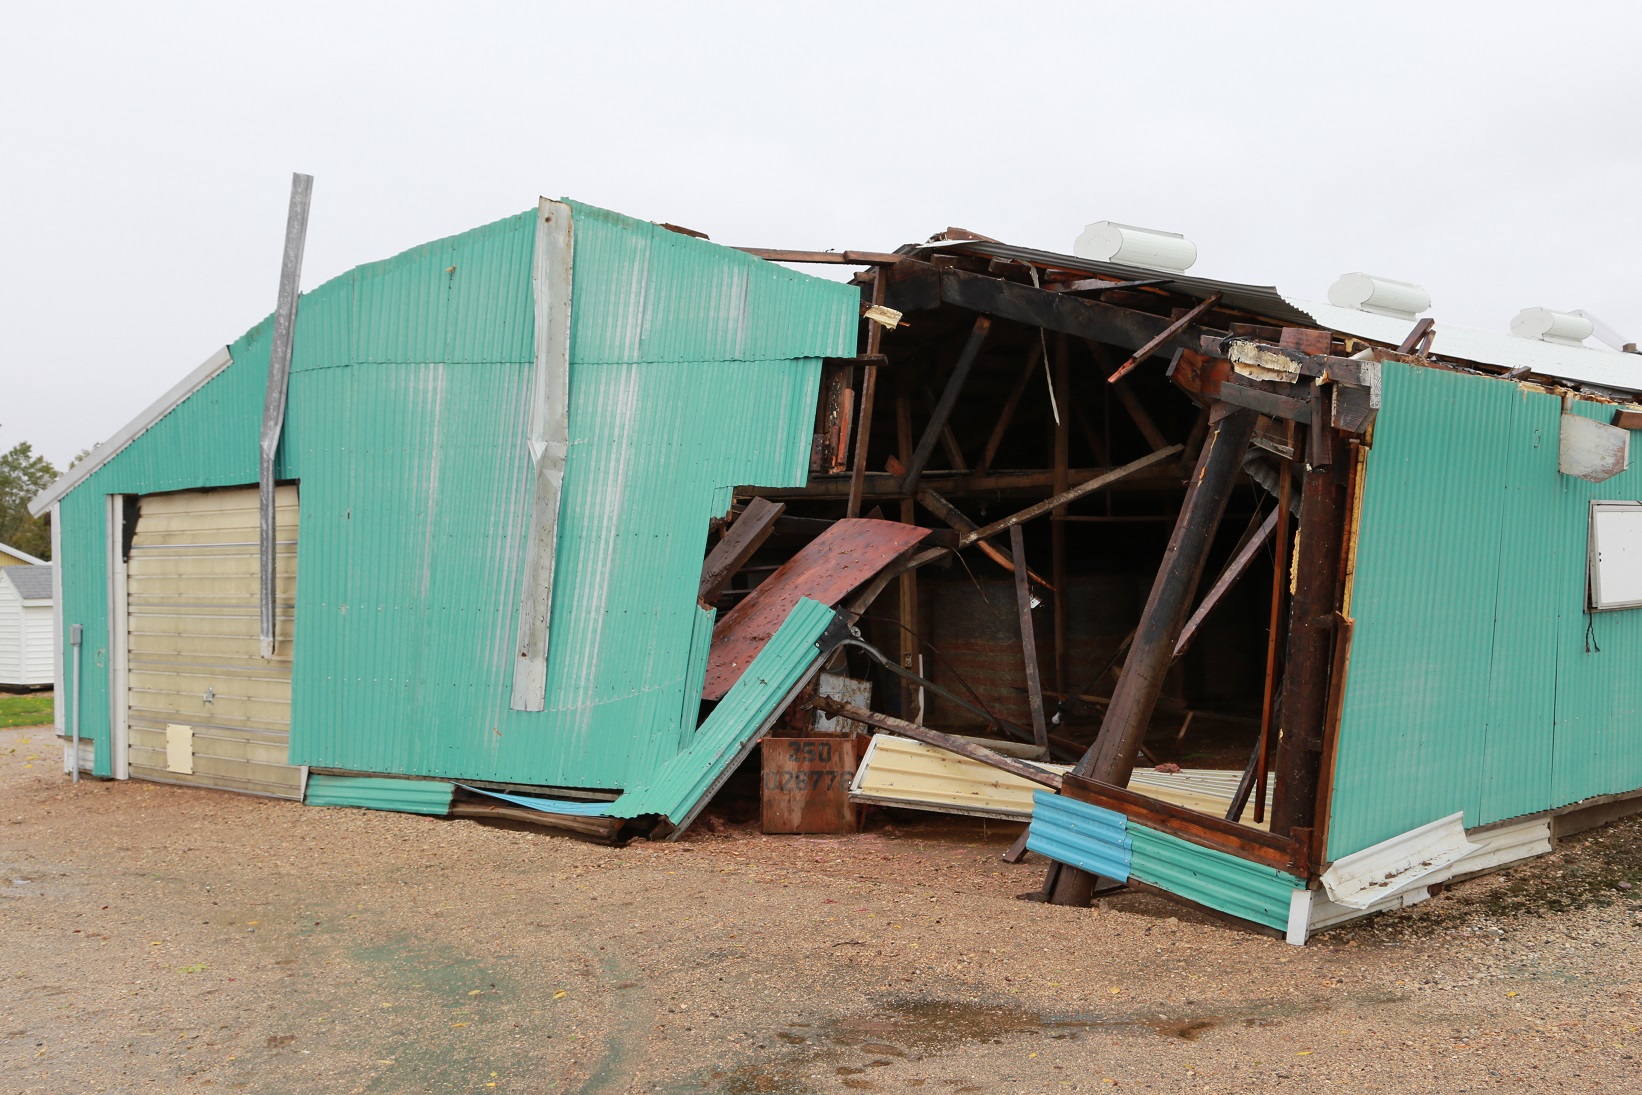 Tornado damage to a farm building 2 miles to the southwest of Dumont, MN.  (Photo by Nick and Amanda Elms)